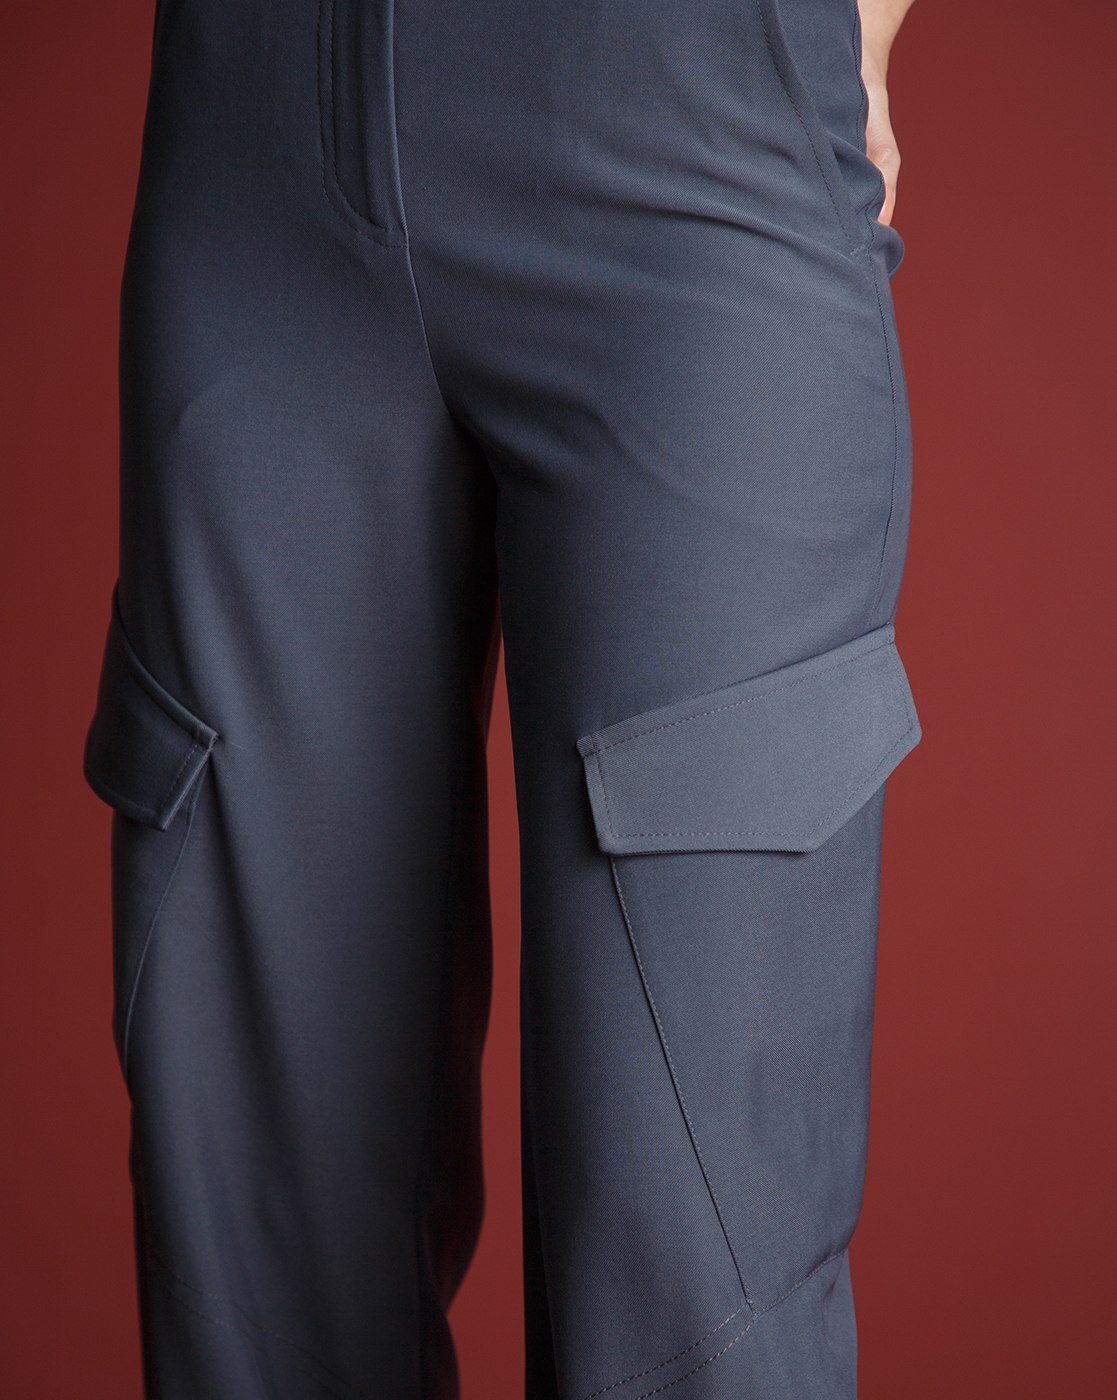 Buy The Dapper Lady Relaxed Fit Cargo Pant with Insert Pockets, Grey Color  Women